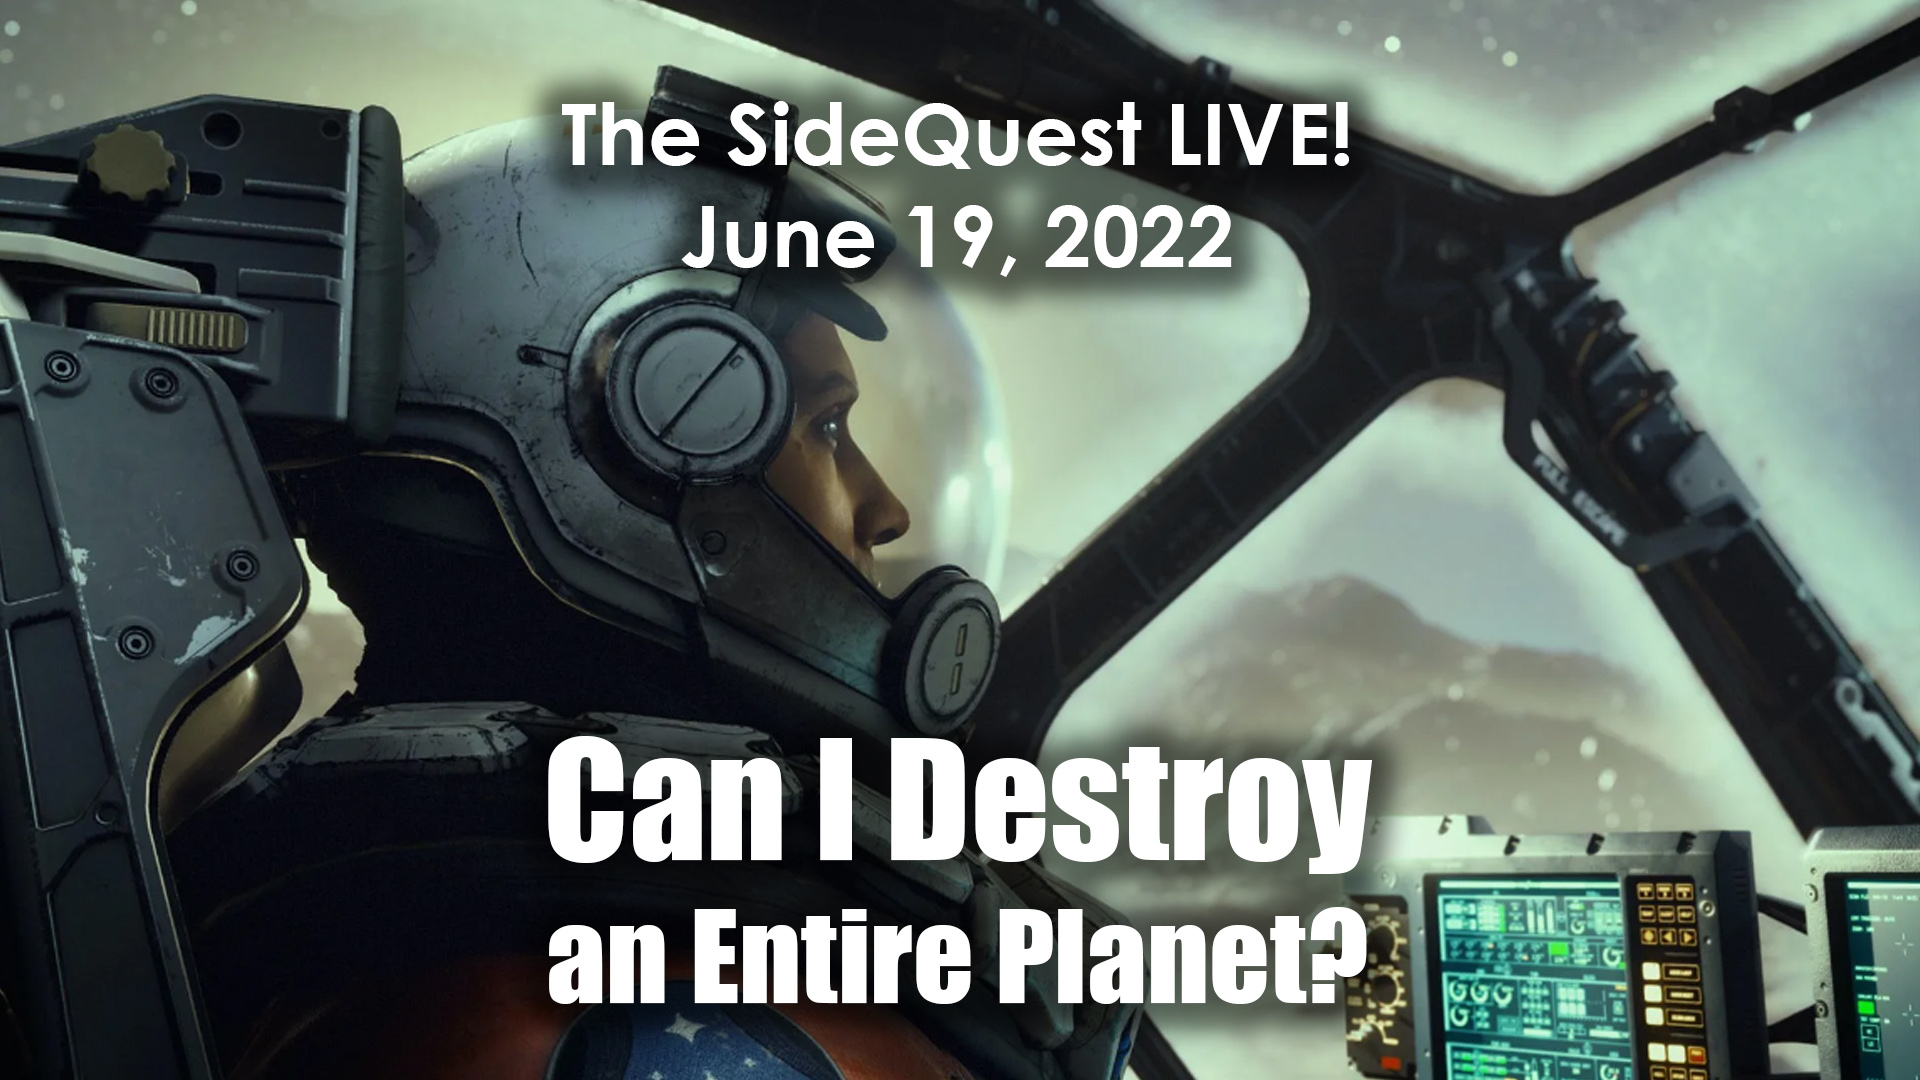 The SideQuest LIVE! June 19, 2022: Can I Destroy an Entire Planet?